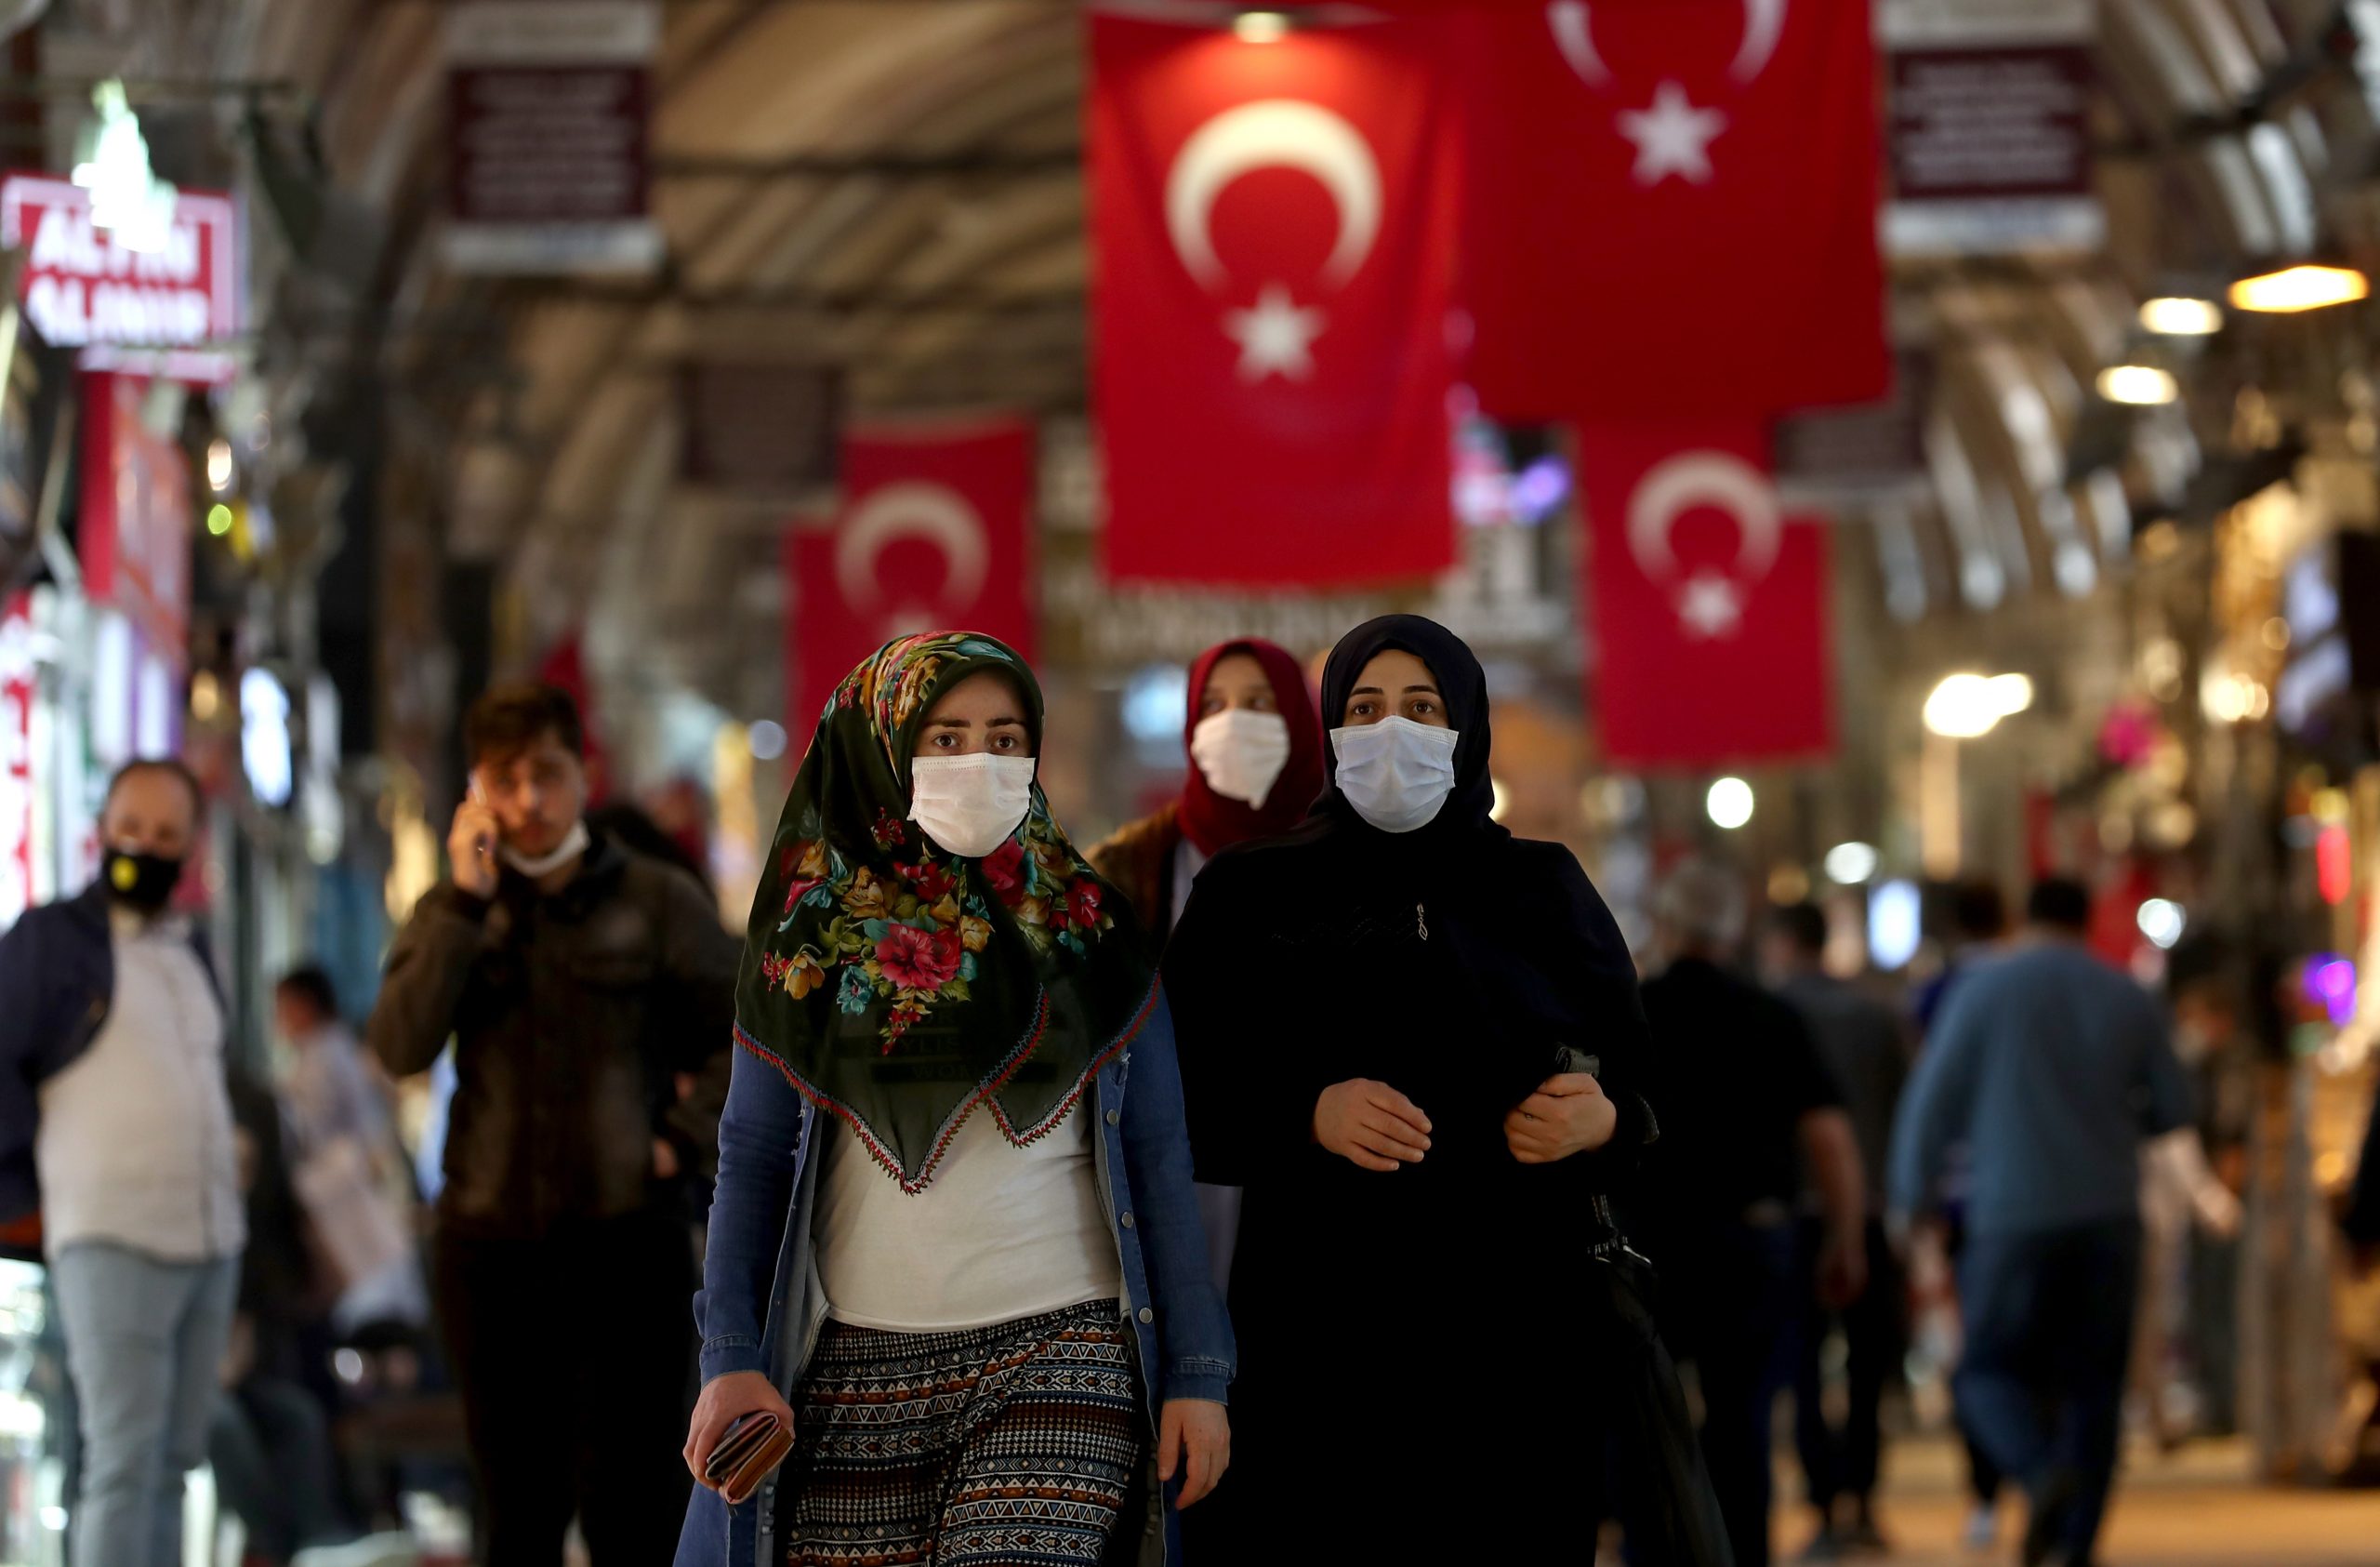 epa08458141 People wearing face masks as they shopat the famous Grand Bazaar in Istanbul, Turkey, 01 June 2020. Turkey re-opens restaurants, cafes, parks, beaches, lifts inter-city travel bans as the country eases coronavirus restrictions amid the ongoing pandemic of the COVID-19 disease caused by the SARS-CoV-2 coronavirus on 01 June 2020.  EPA/SEDAT SUNA